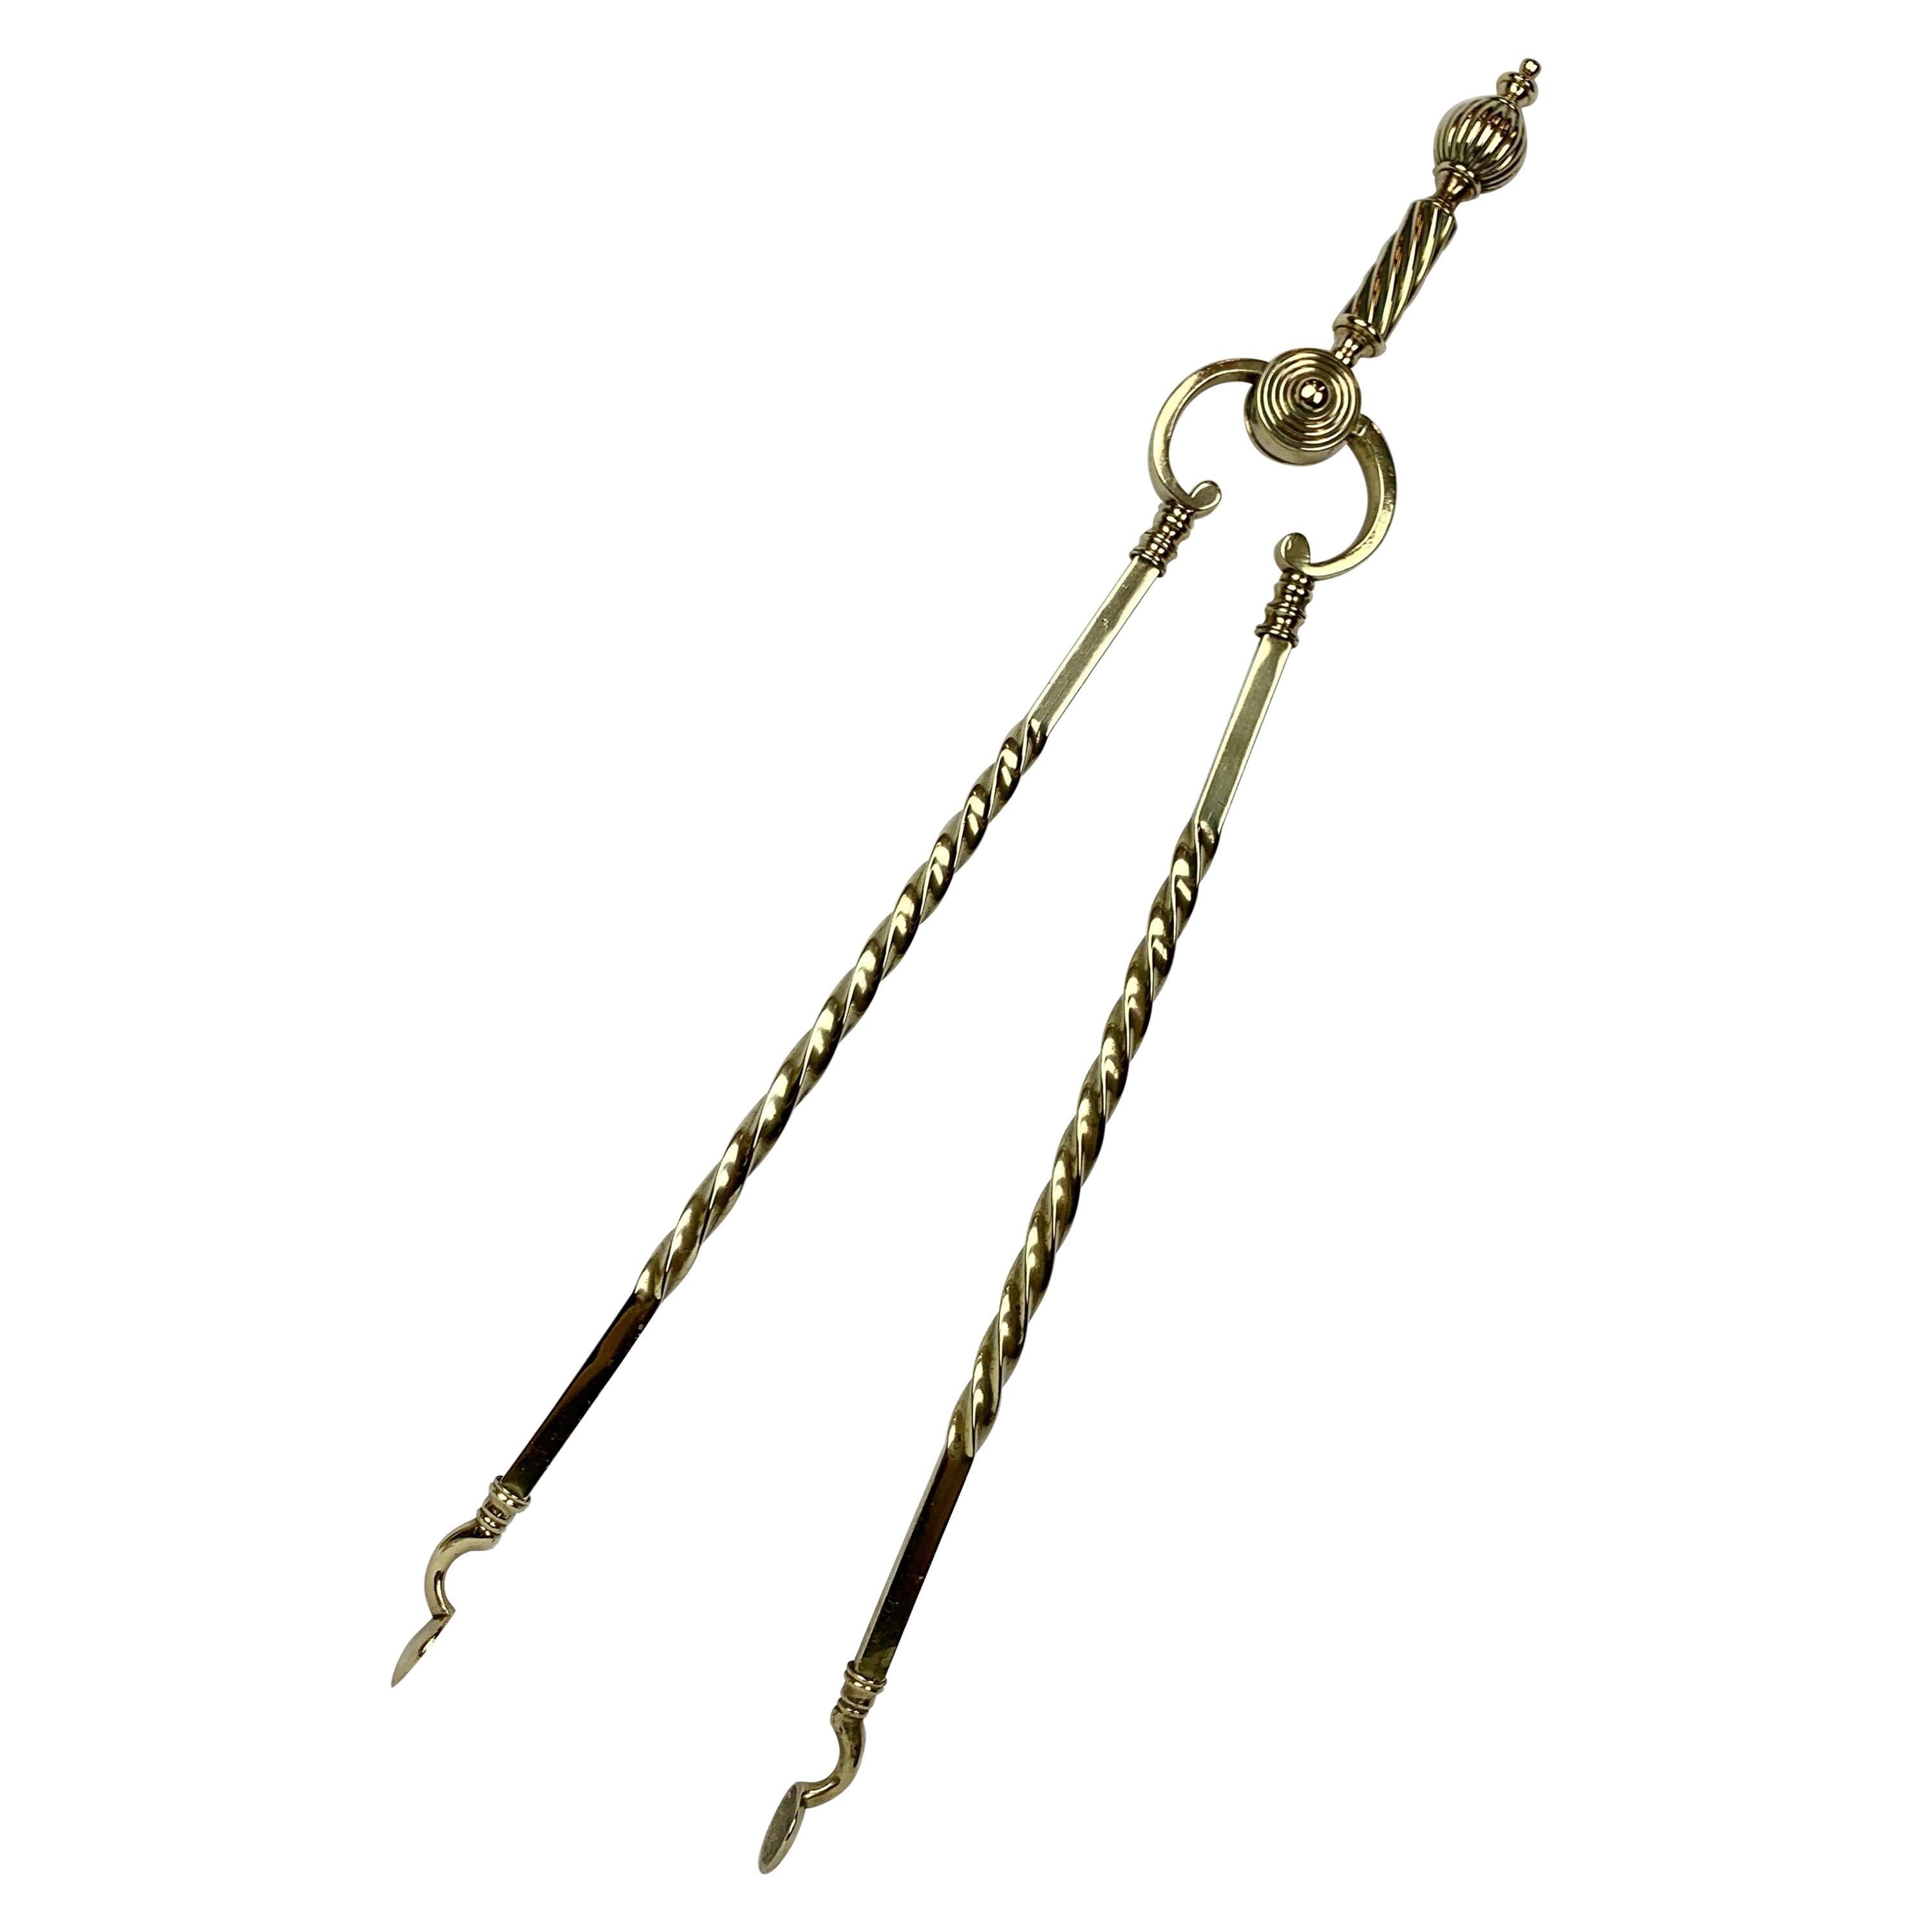 Fireplace Tongs in Solid Brass-England, 19th c.